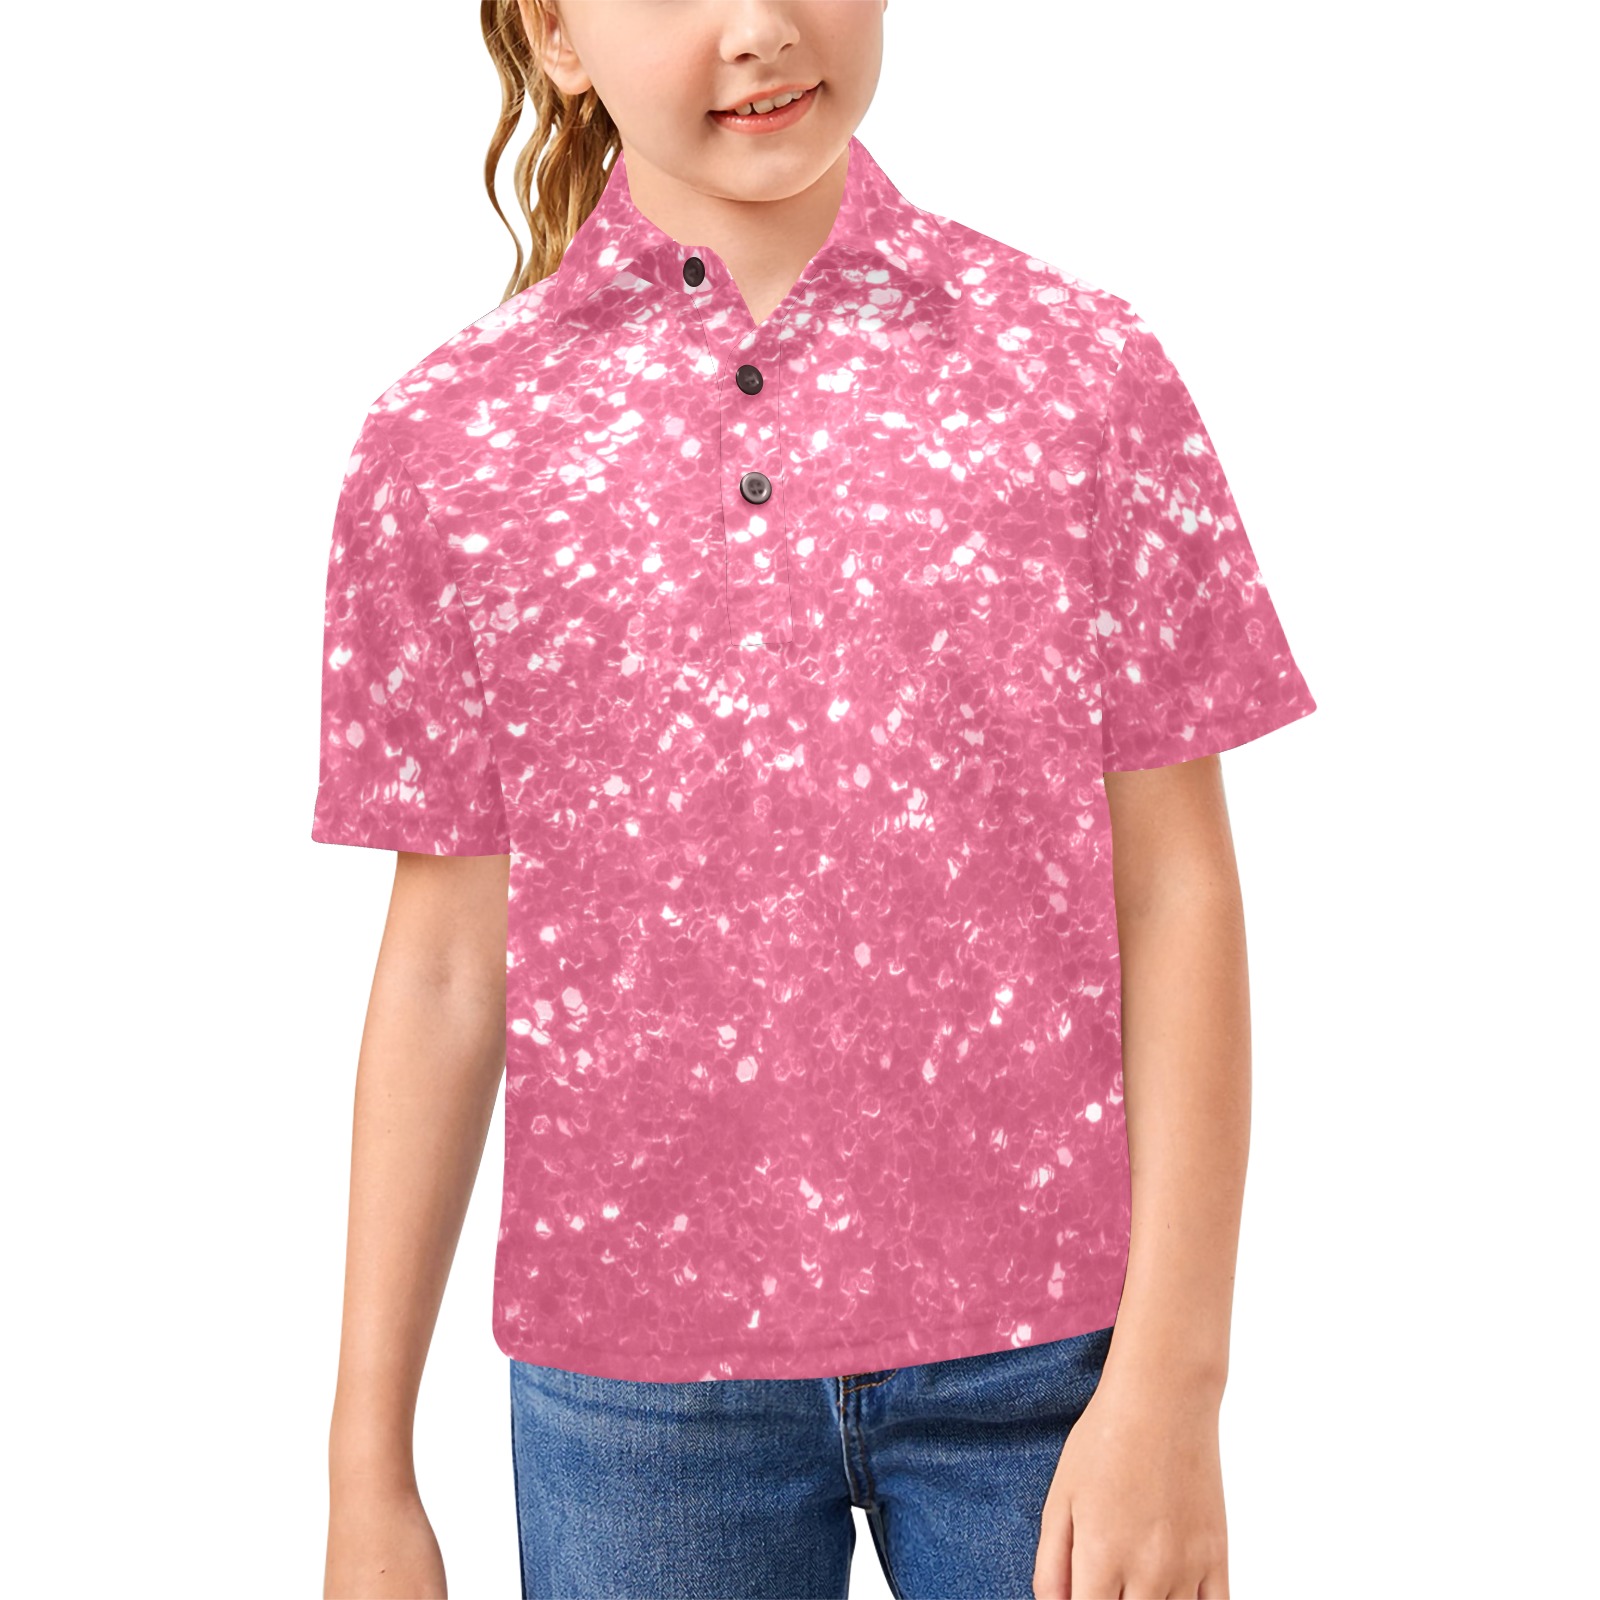 Magenta light pink red faux sparkles glitter Big Girls' All Over Print Polo Shirt (Model T55)